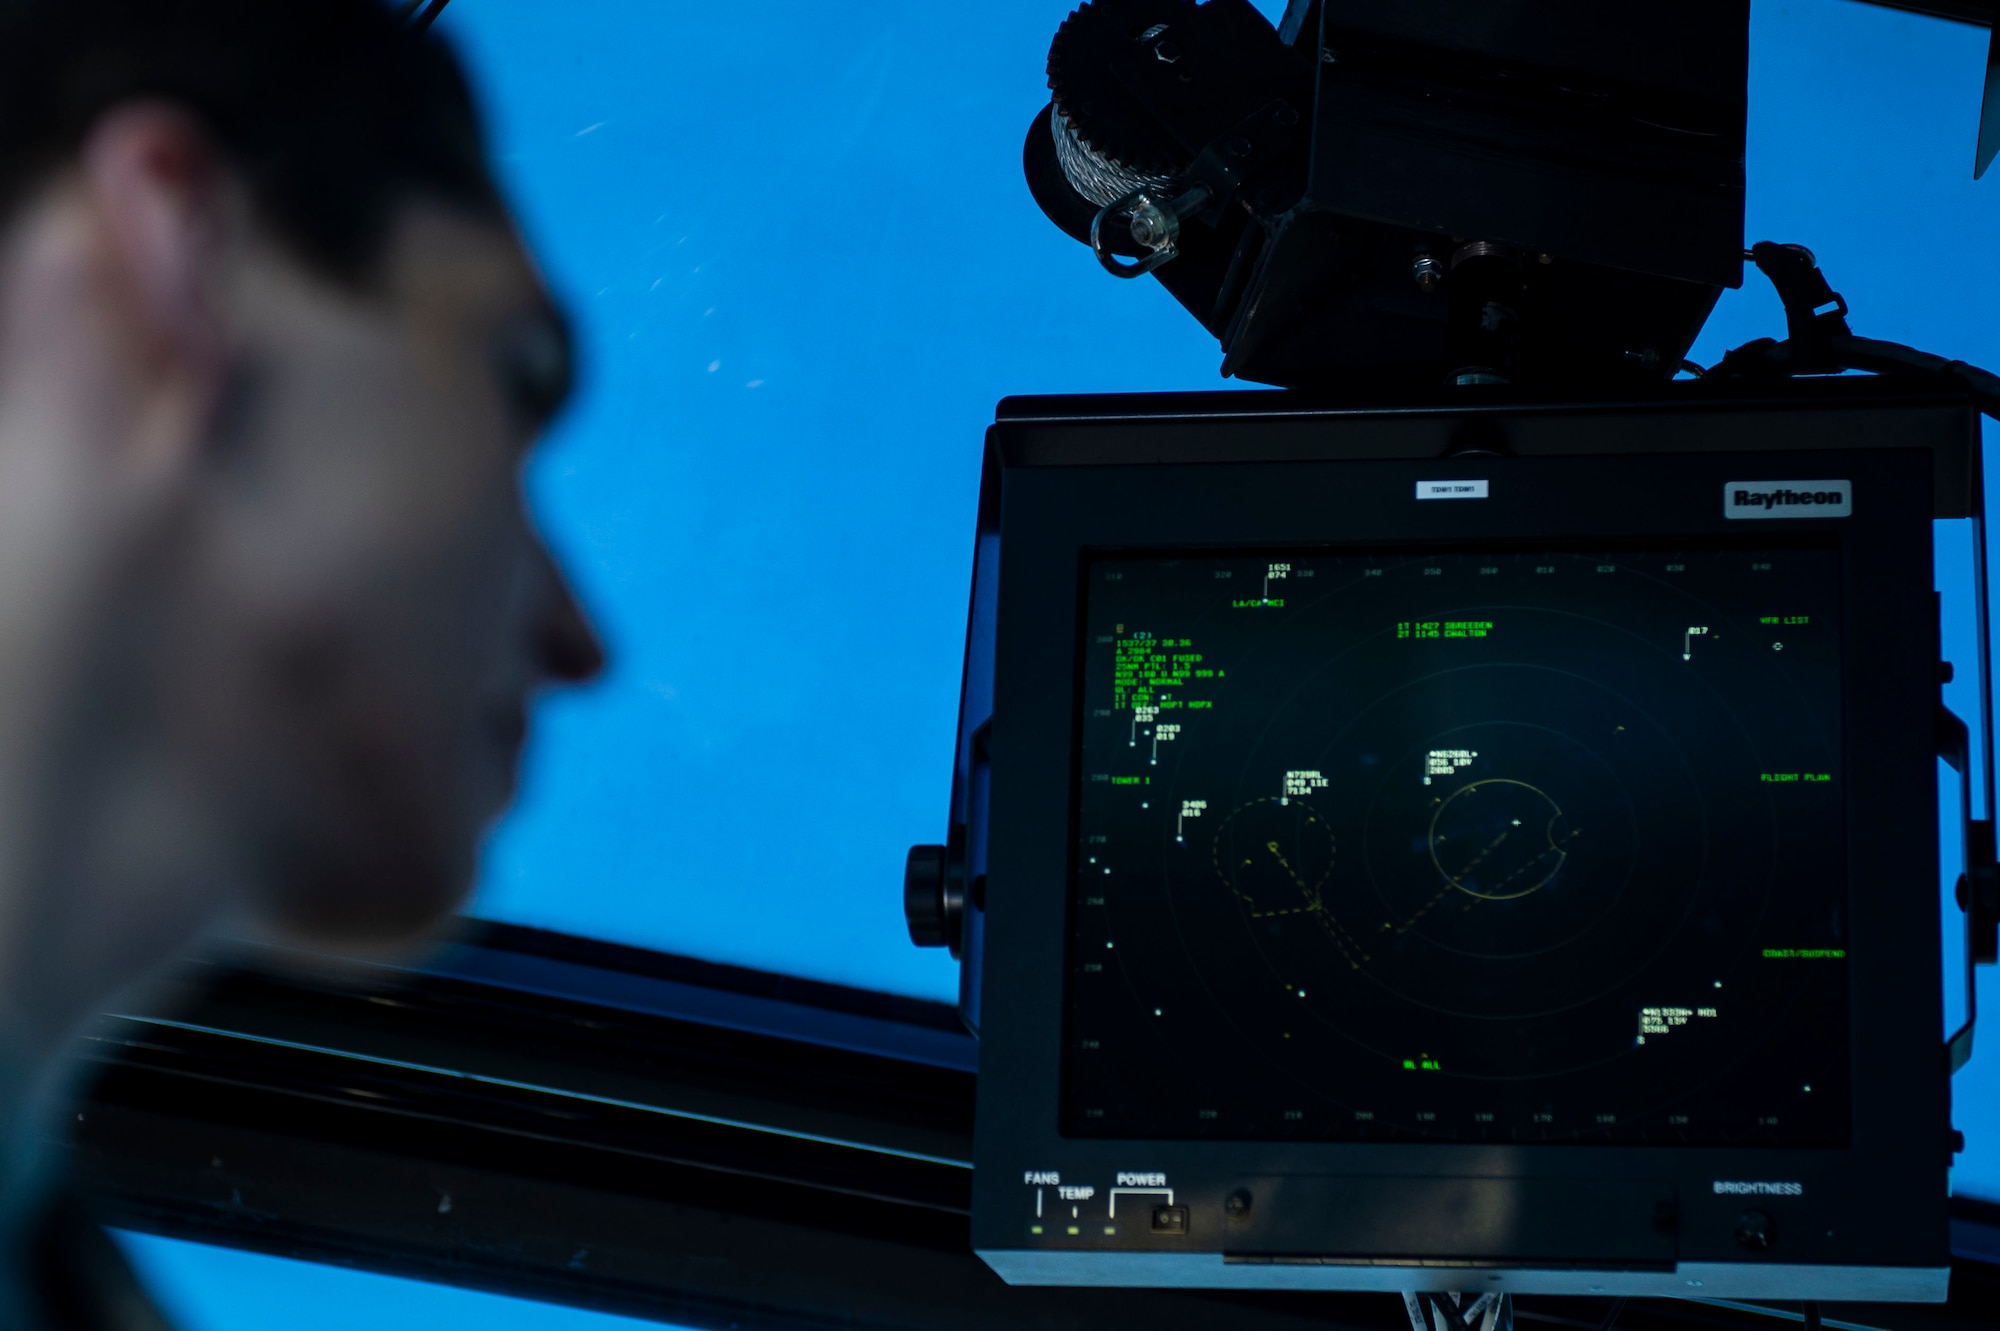 U.S. Air Force Airman 1st Class Timothy Johnson, 20th Operations Support Squadron air traffic controller, looks at a certified radar display system at Shaw Air Force Base, S.C., Oct. 22, 2018.